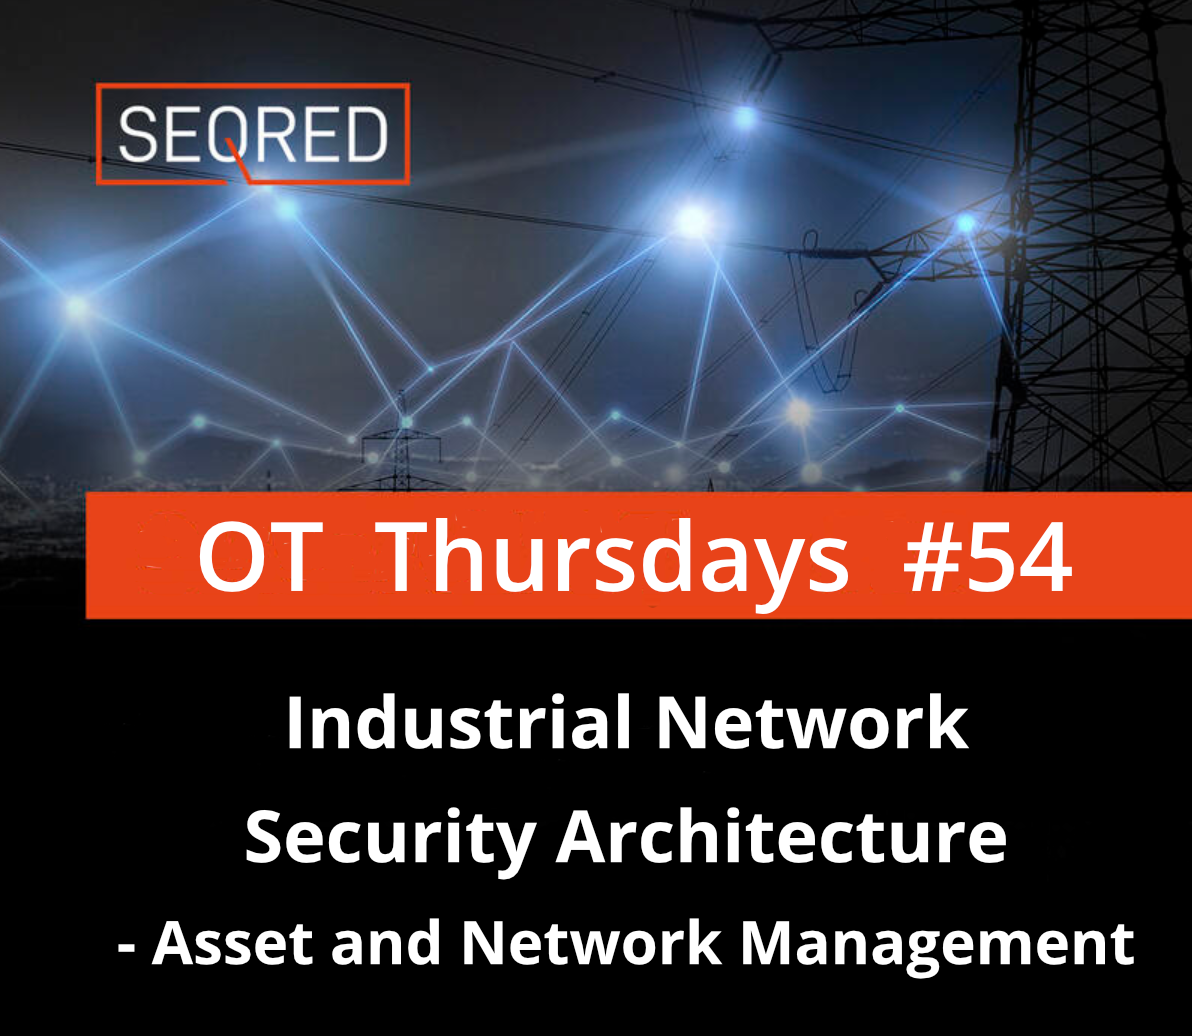 Industrial Network Security Architecture - Asset and Network Management